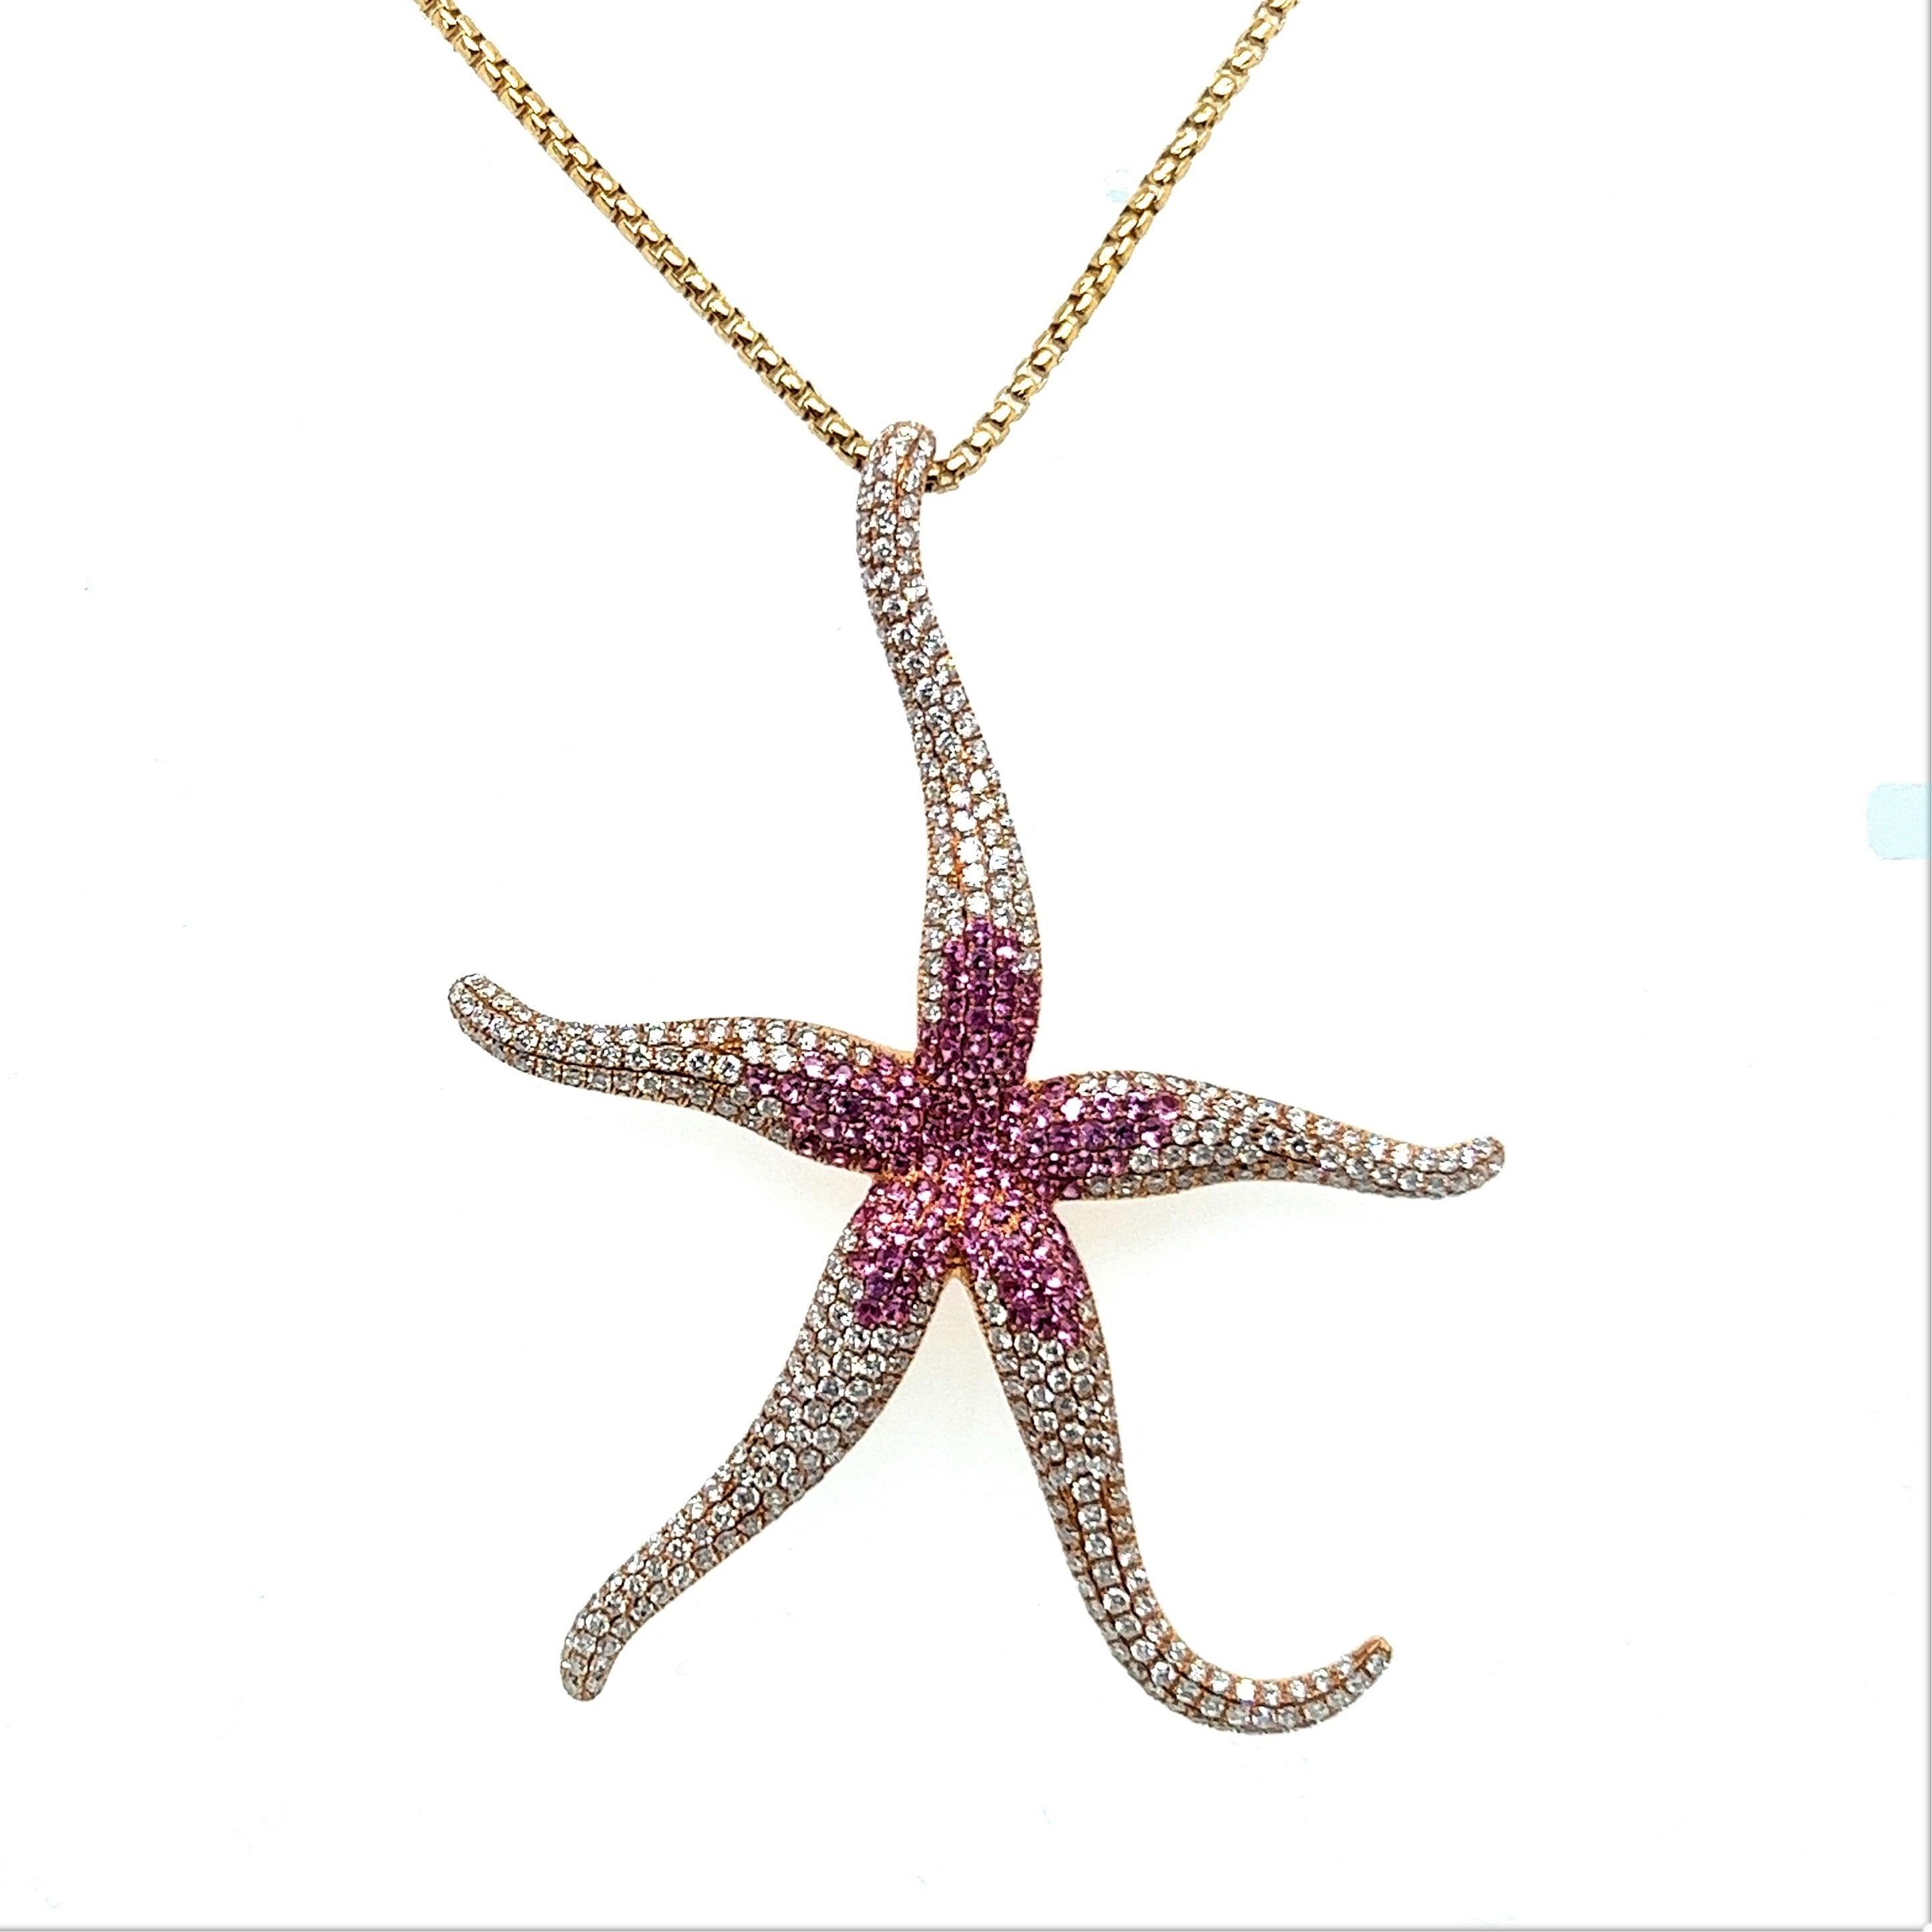 Charming necklace in an alluring combination of pink sapphires and diamonds. Inspired by a marine theme that captures essence of the ocean and adds a touch of festive chic to your look, it is an aesthetic splash of colour and form. 

Crafted from